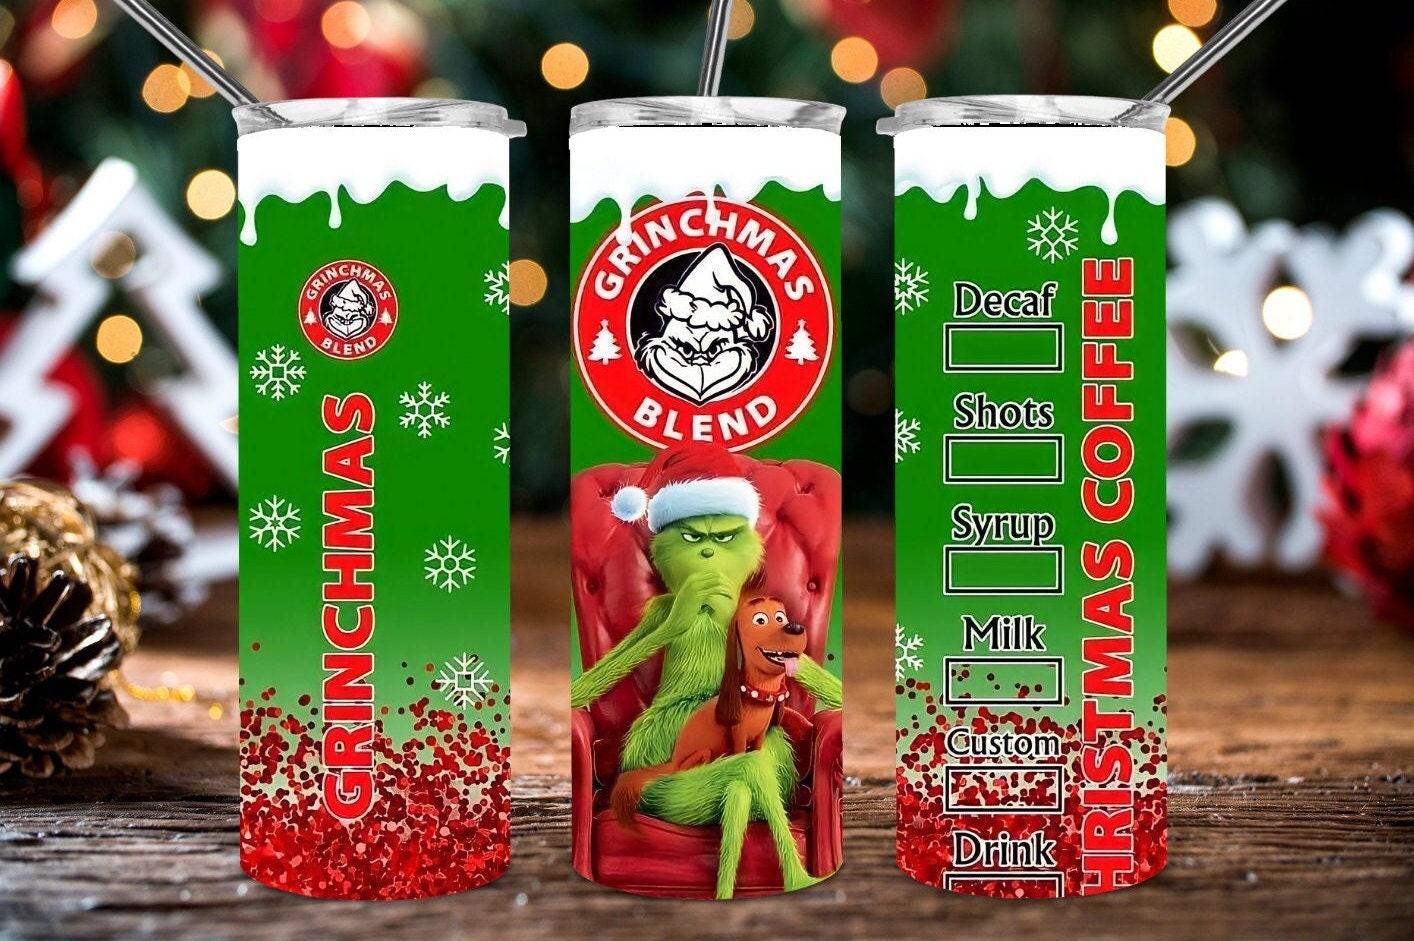 Grinchmas Blend Limited Edition Color Changing Starbucks Green to Red –  SheltonShirts